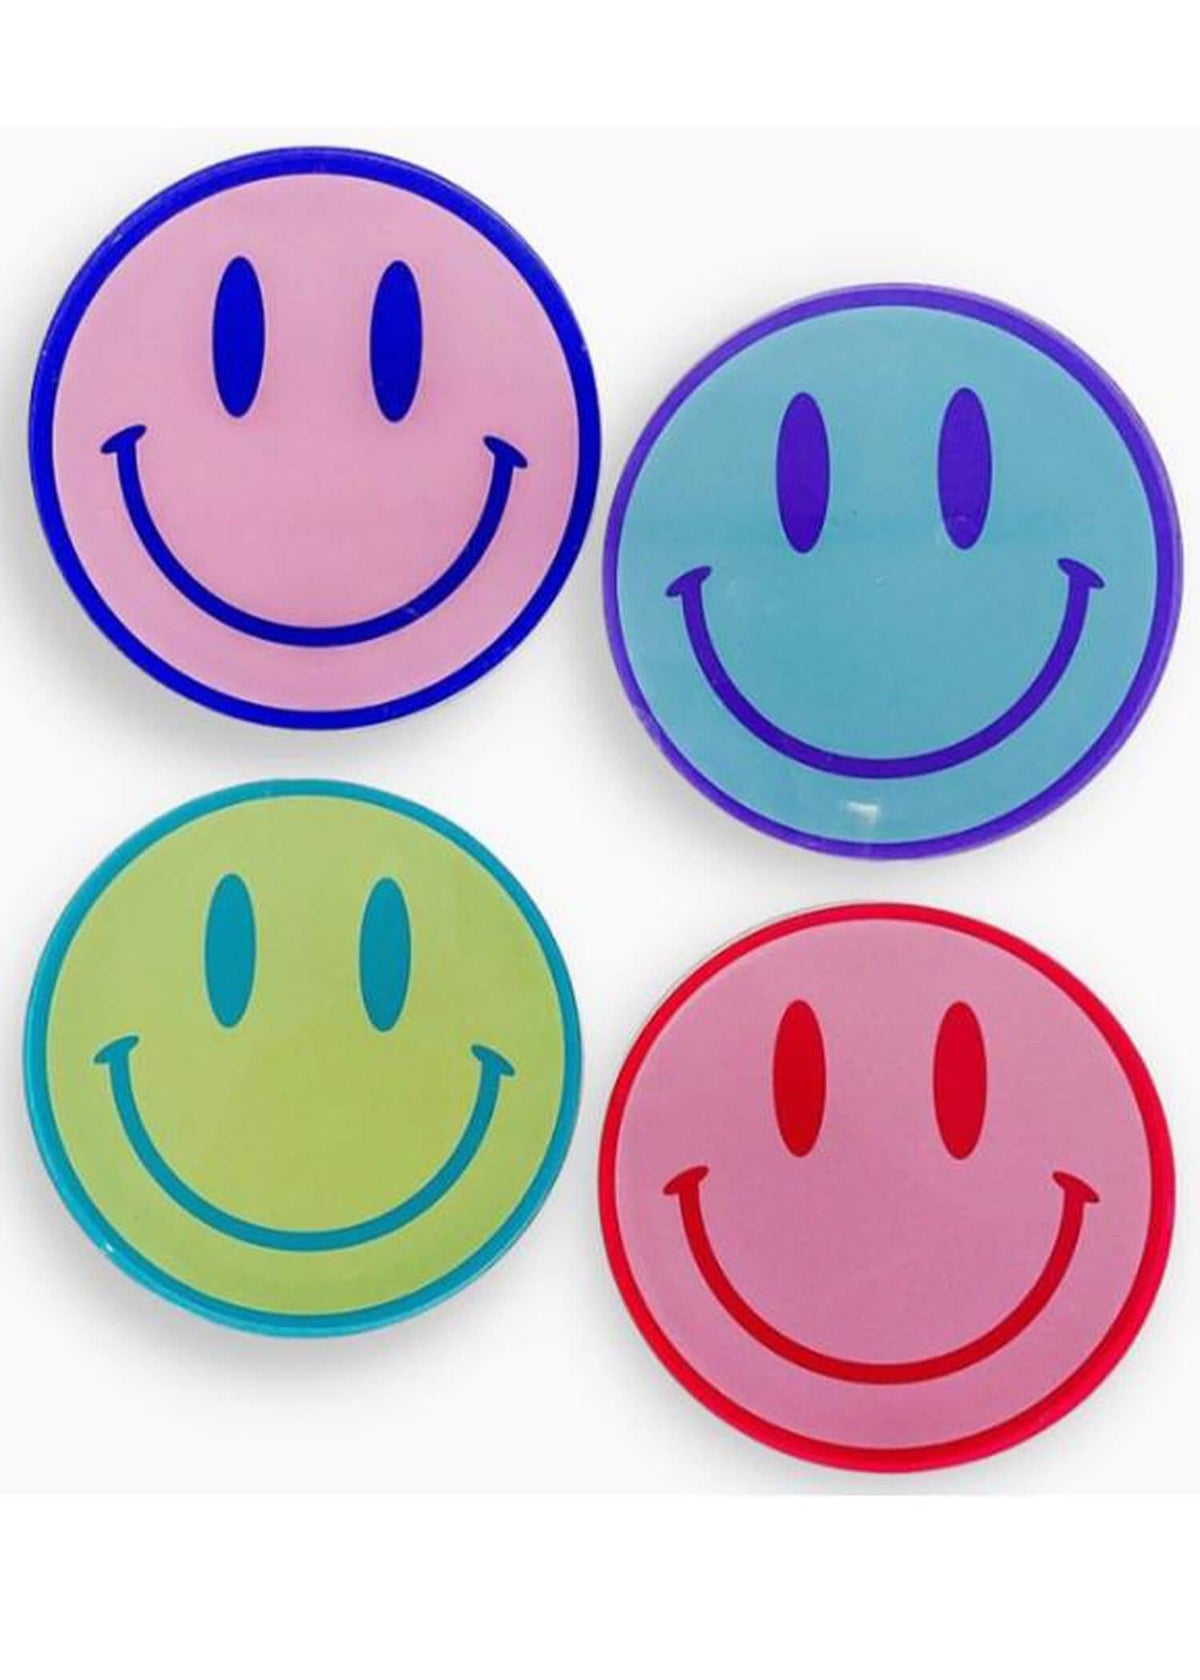 All Smiles Coasters (Set of 4) Drinkware MerciGrace Boutique.